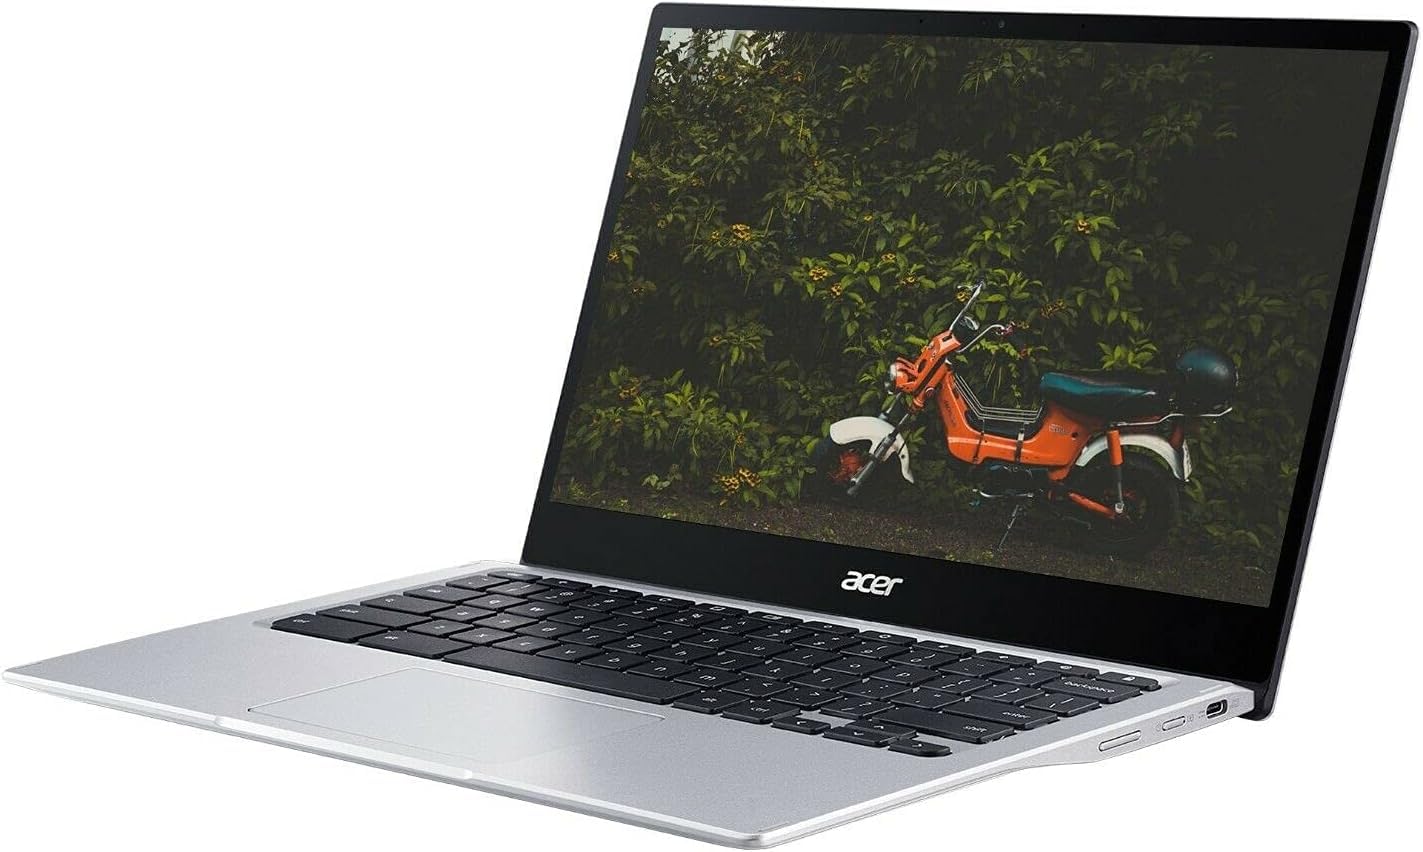 acer Spin 513 Chromebook, 13.3" FHD 2-in-1 IPS Multi-Touch Corning Gorilla Glass Display, Qualcomm Snapdragon 7c SC7180, 2.1GHz, 4GB RAM, 64GB eMMC, Chrome OS, Silver + Accessories